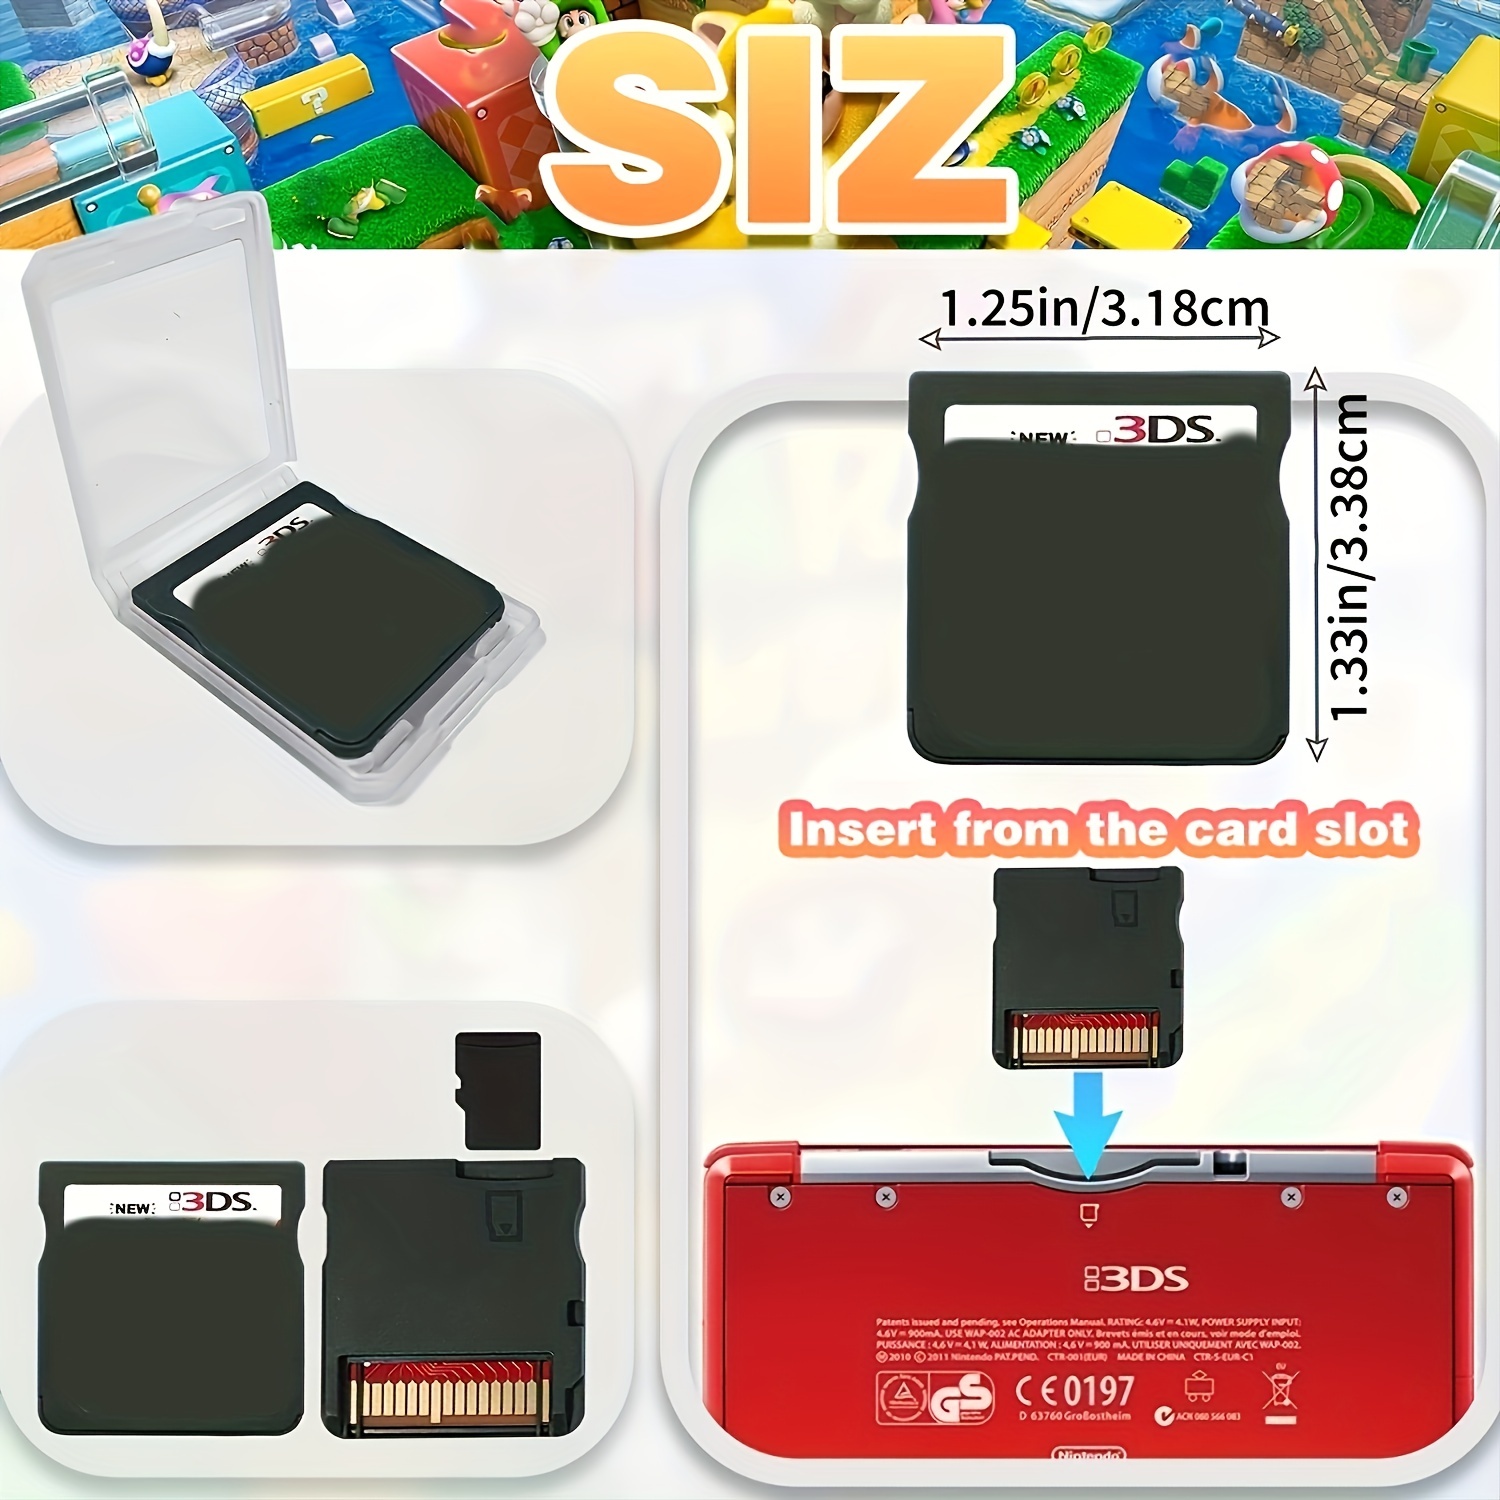 Accessoires - COLLECTORS ITEM - R4 3DS FOR NDS/NDSL/NDSi/NDS XL/N3DS -  NEVER USED IN RETAIL PACKING